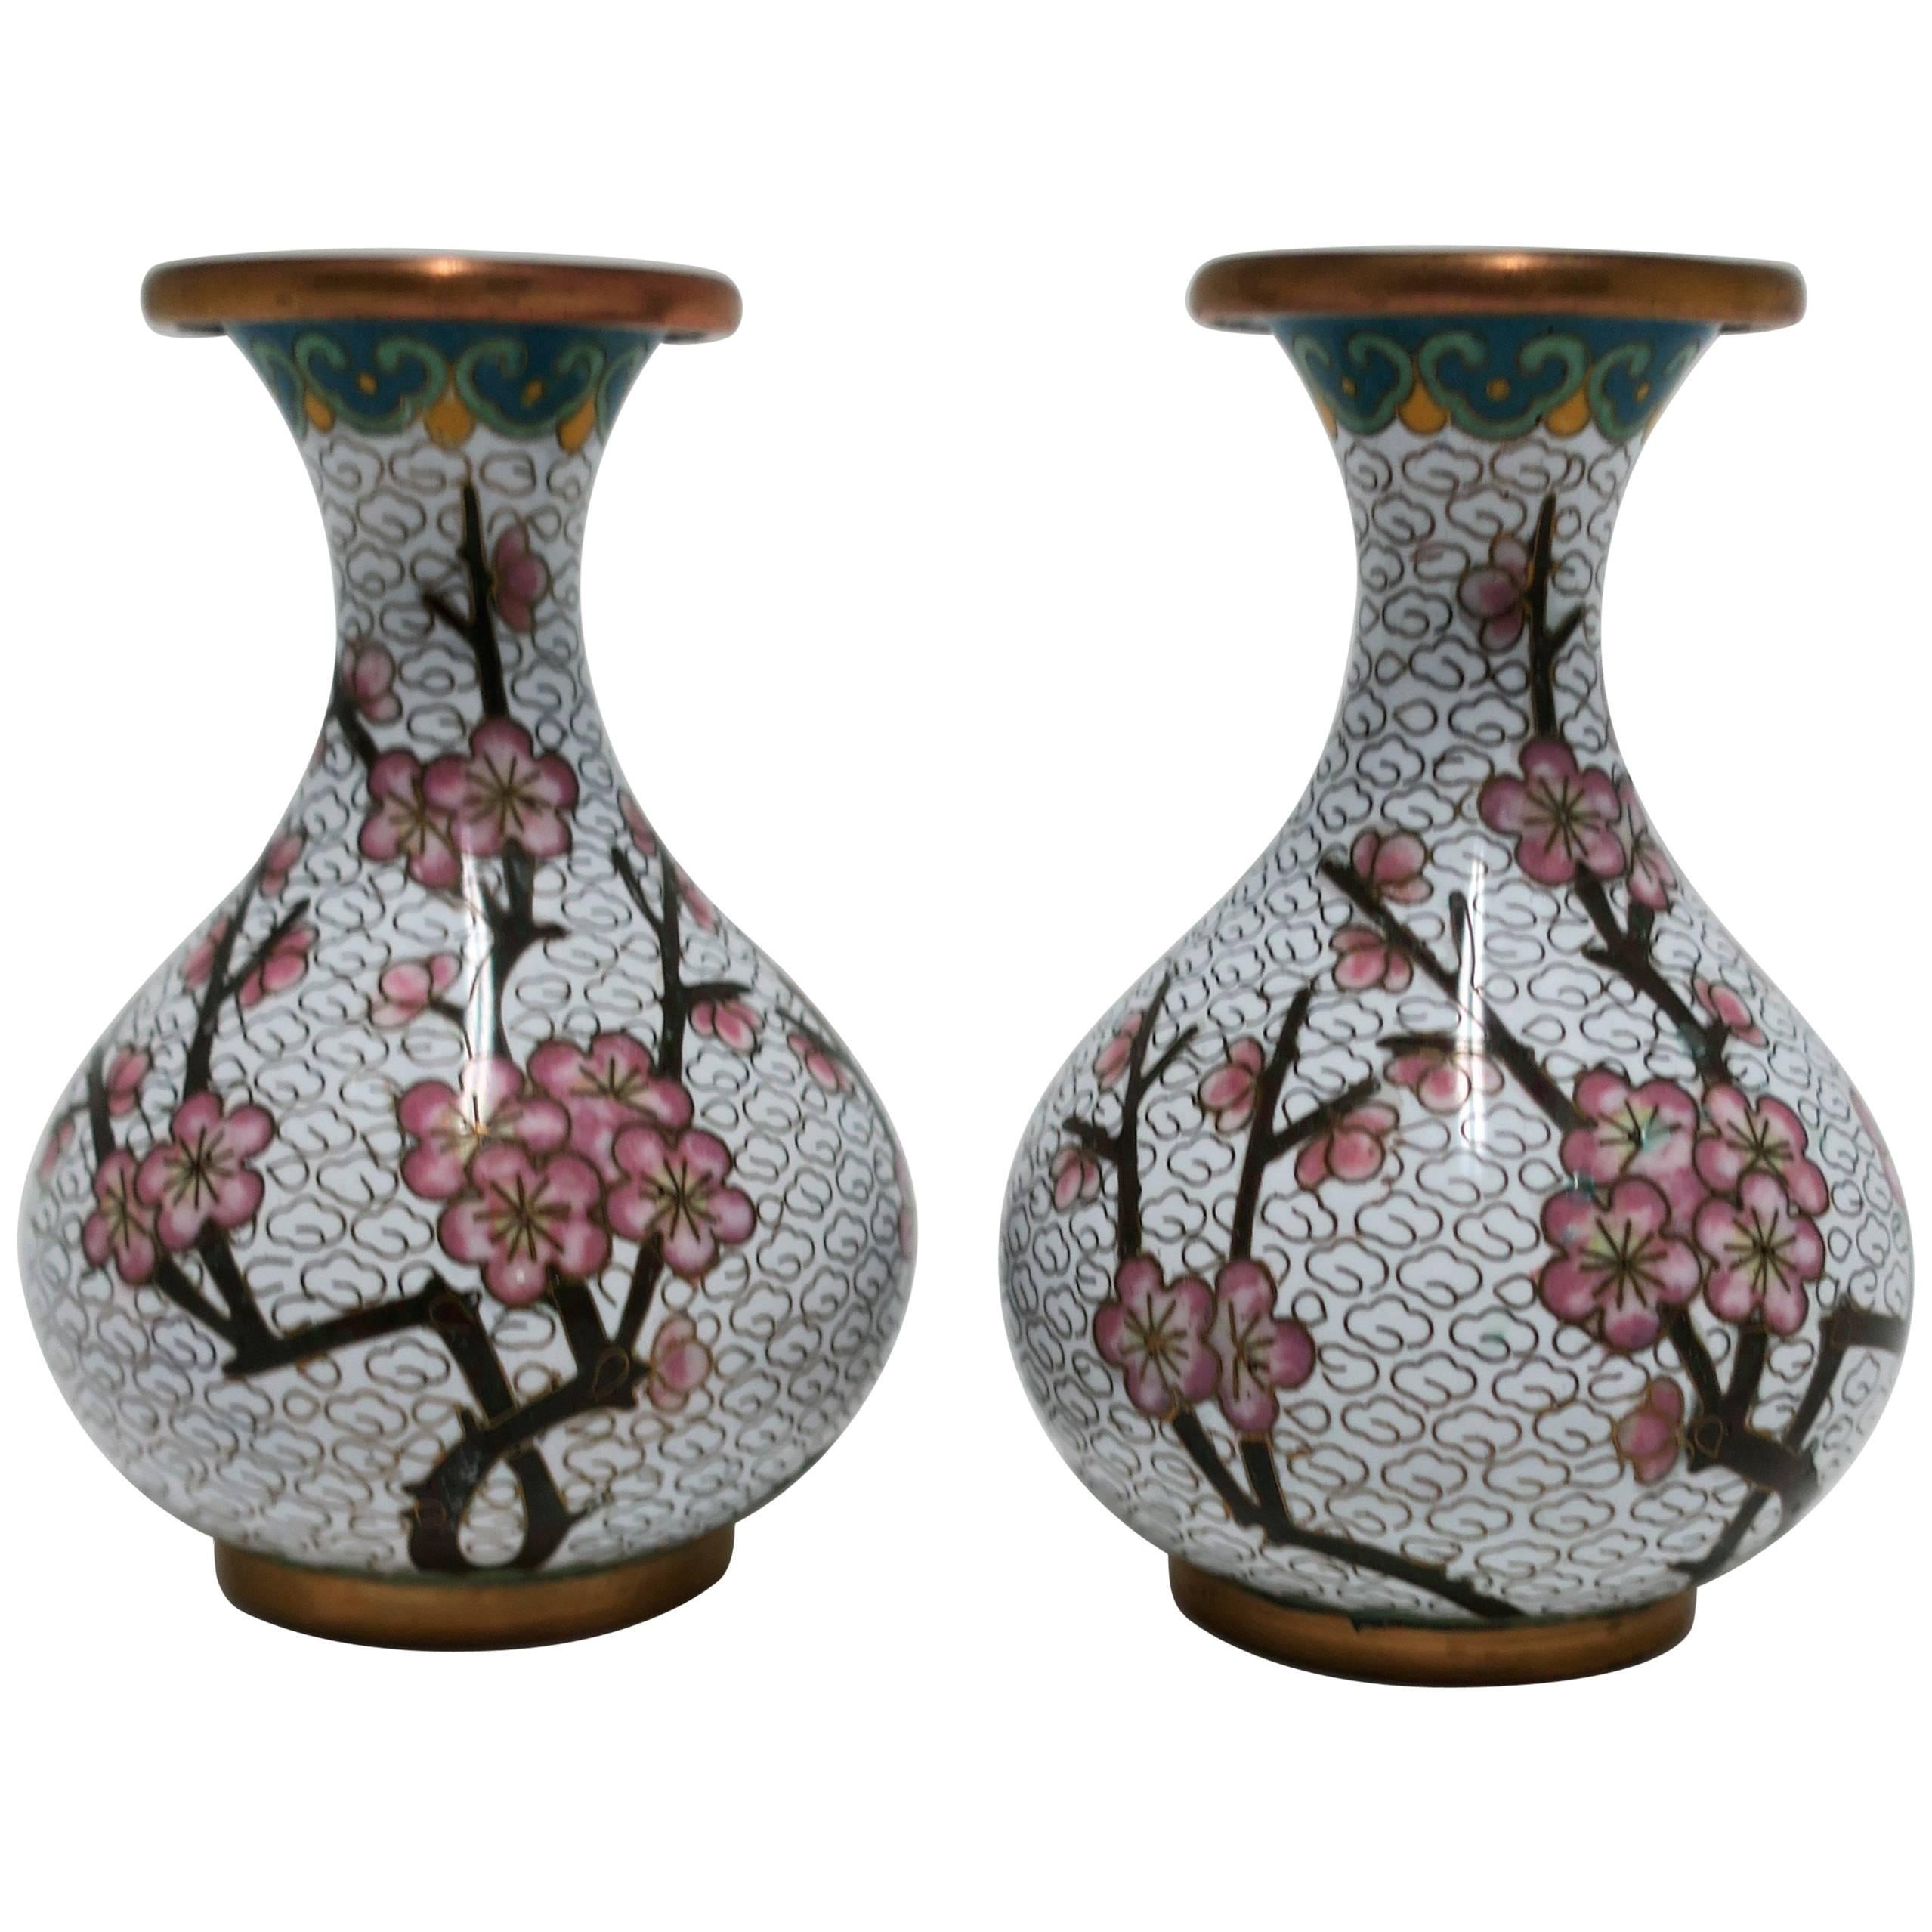 White and Pink Cloisonné Enamel Brass Vases with Cherry Blossom Design, Pair For Sale 6